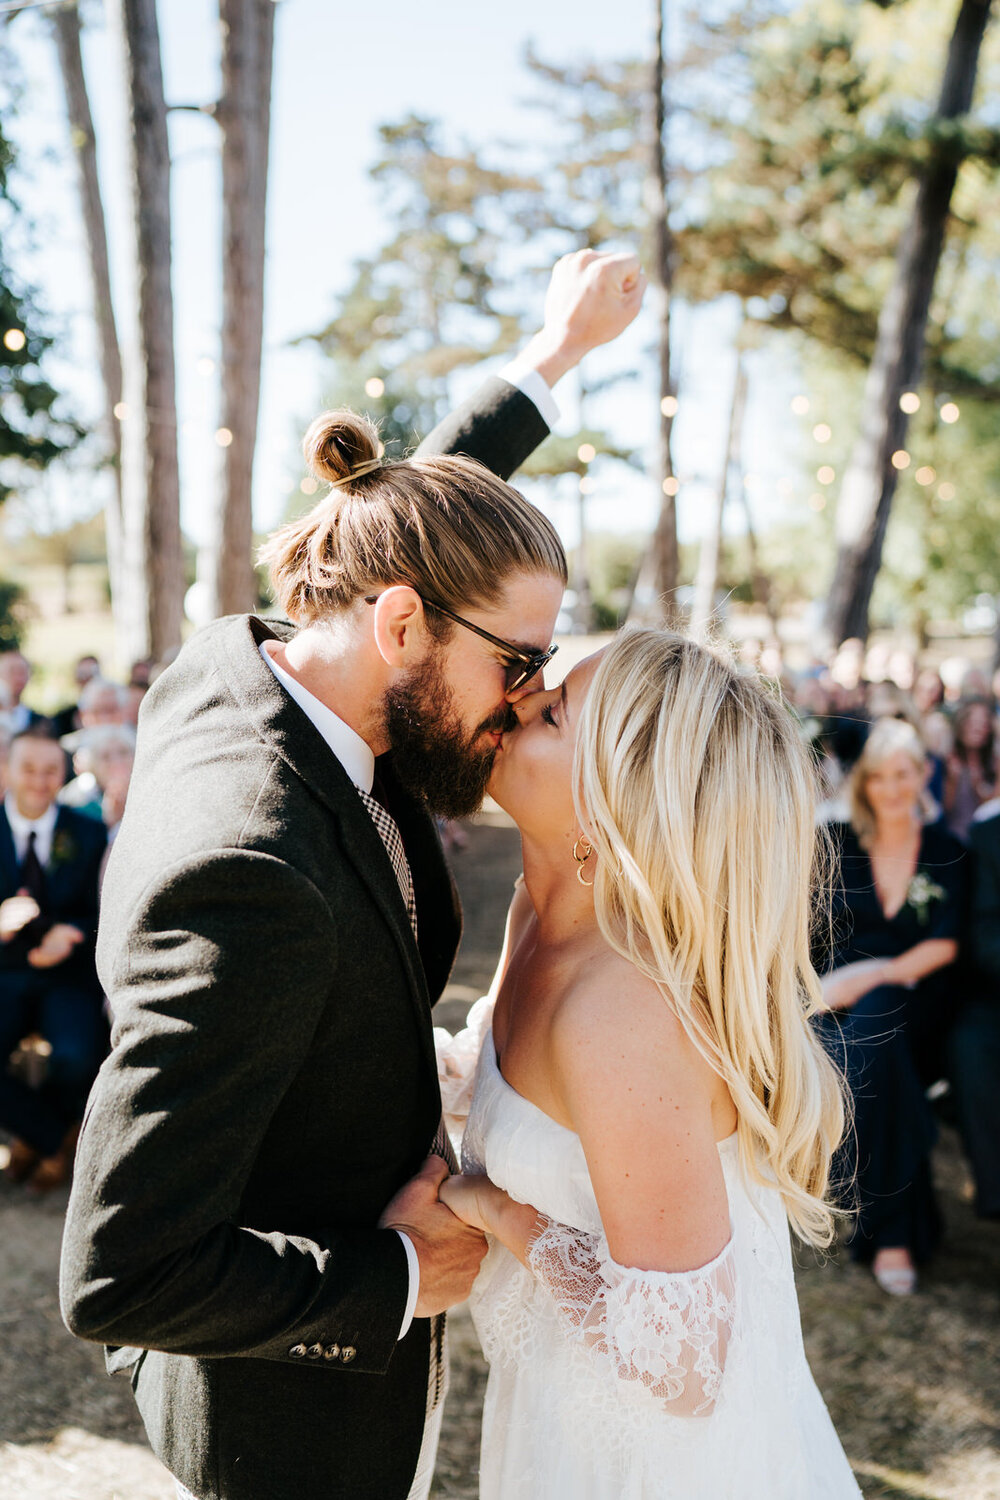 Groom pumps fist into the air during first kiss at outdoor ceremony